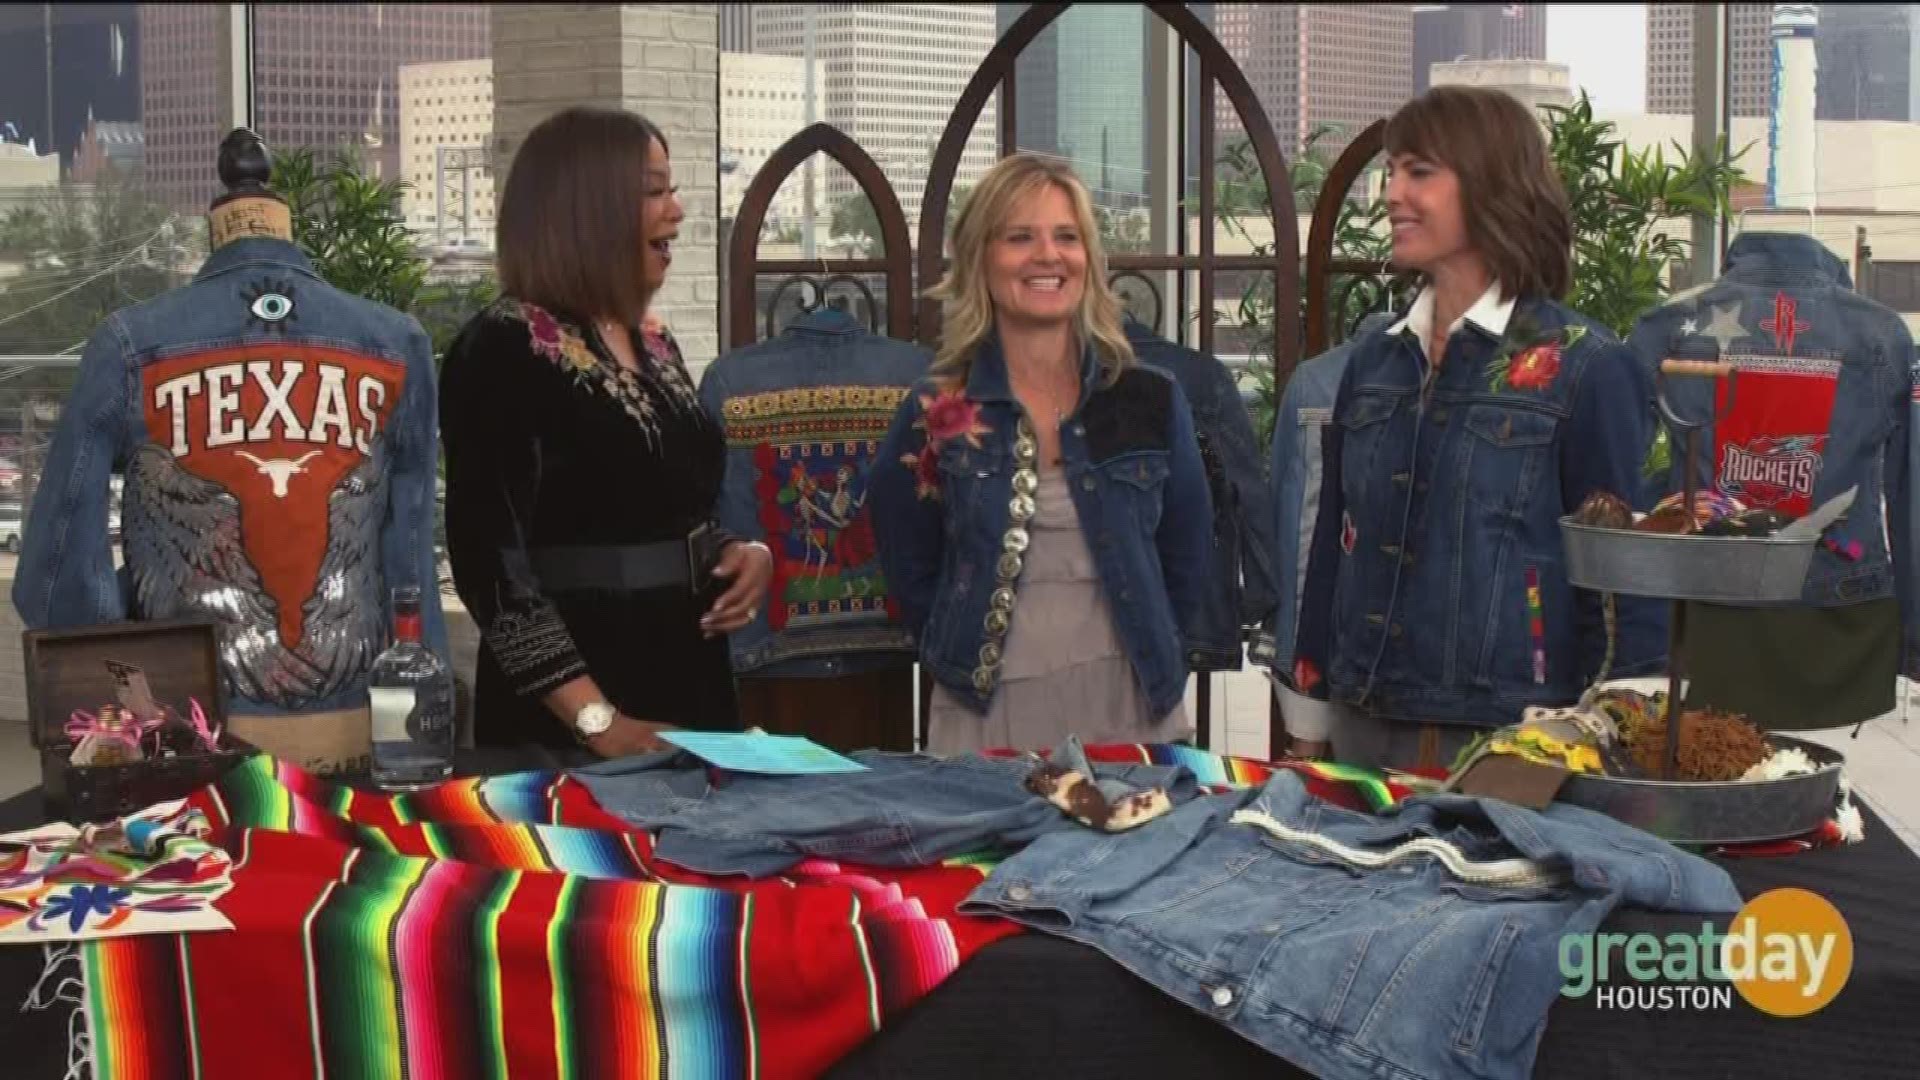 Started by two friends, the company can customize any denim jacket